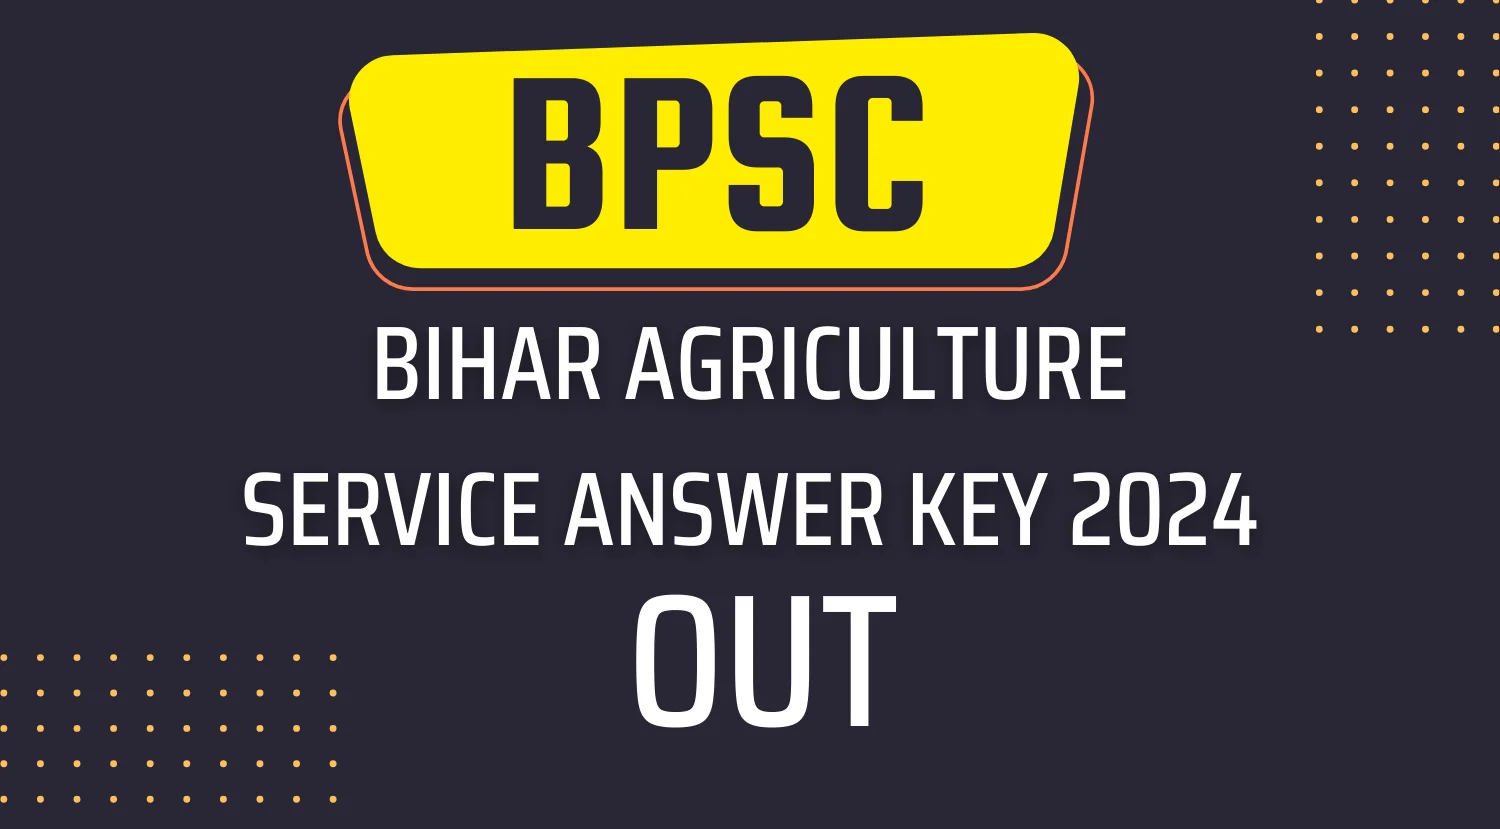 BPSC Answer Key 2024 OUT, Download the Bihar Agriculture Service Official Key from Here Now